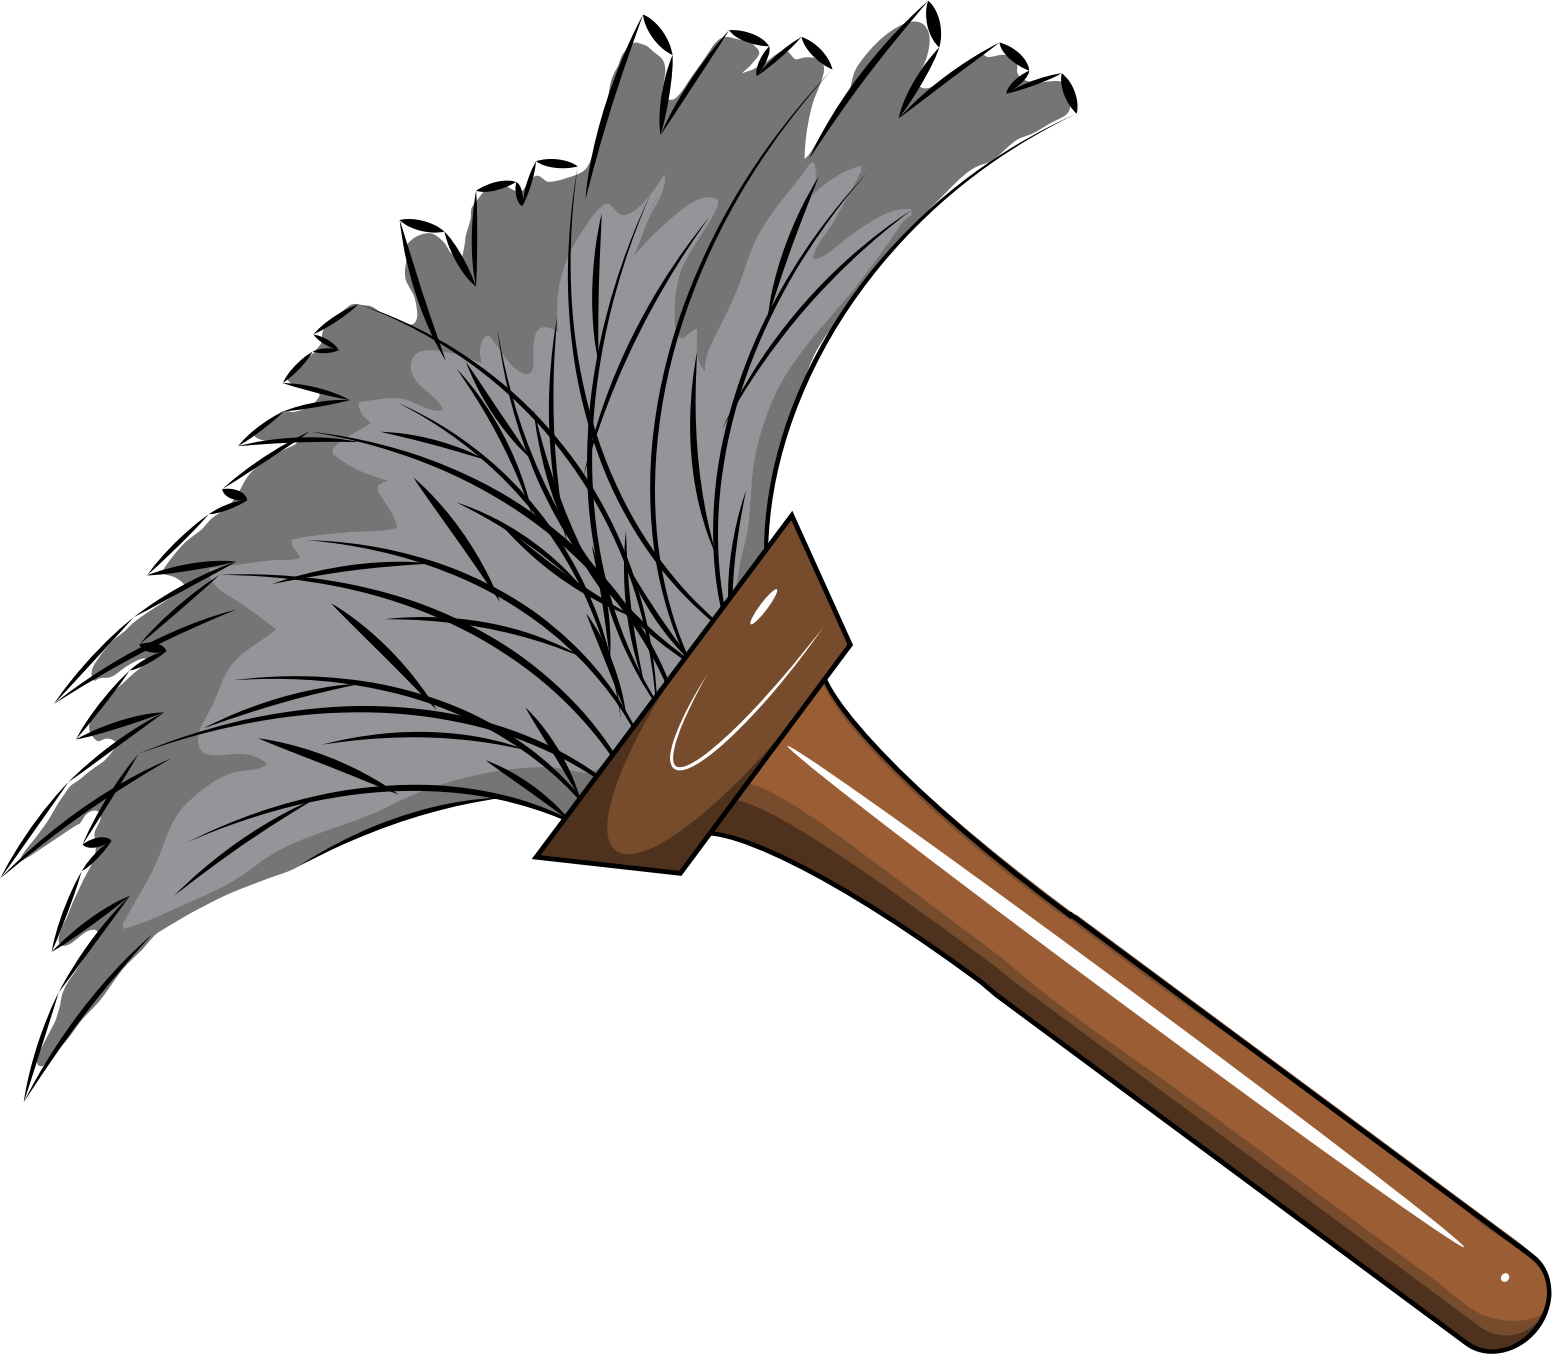 Big image png. Maid clipart feather duster